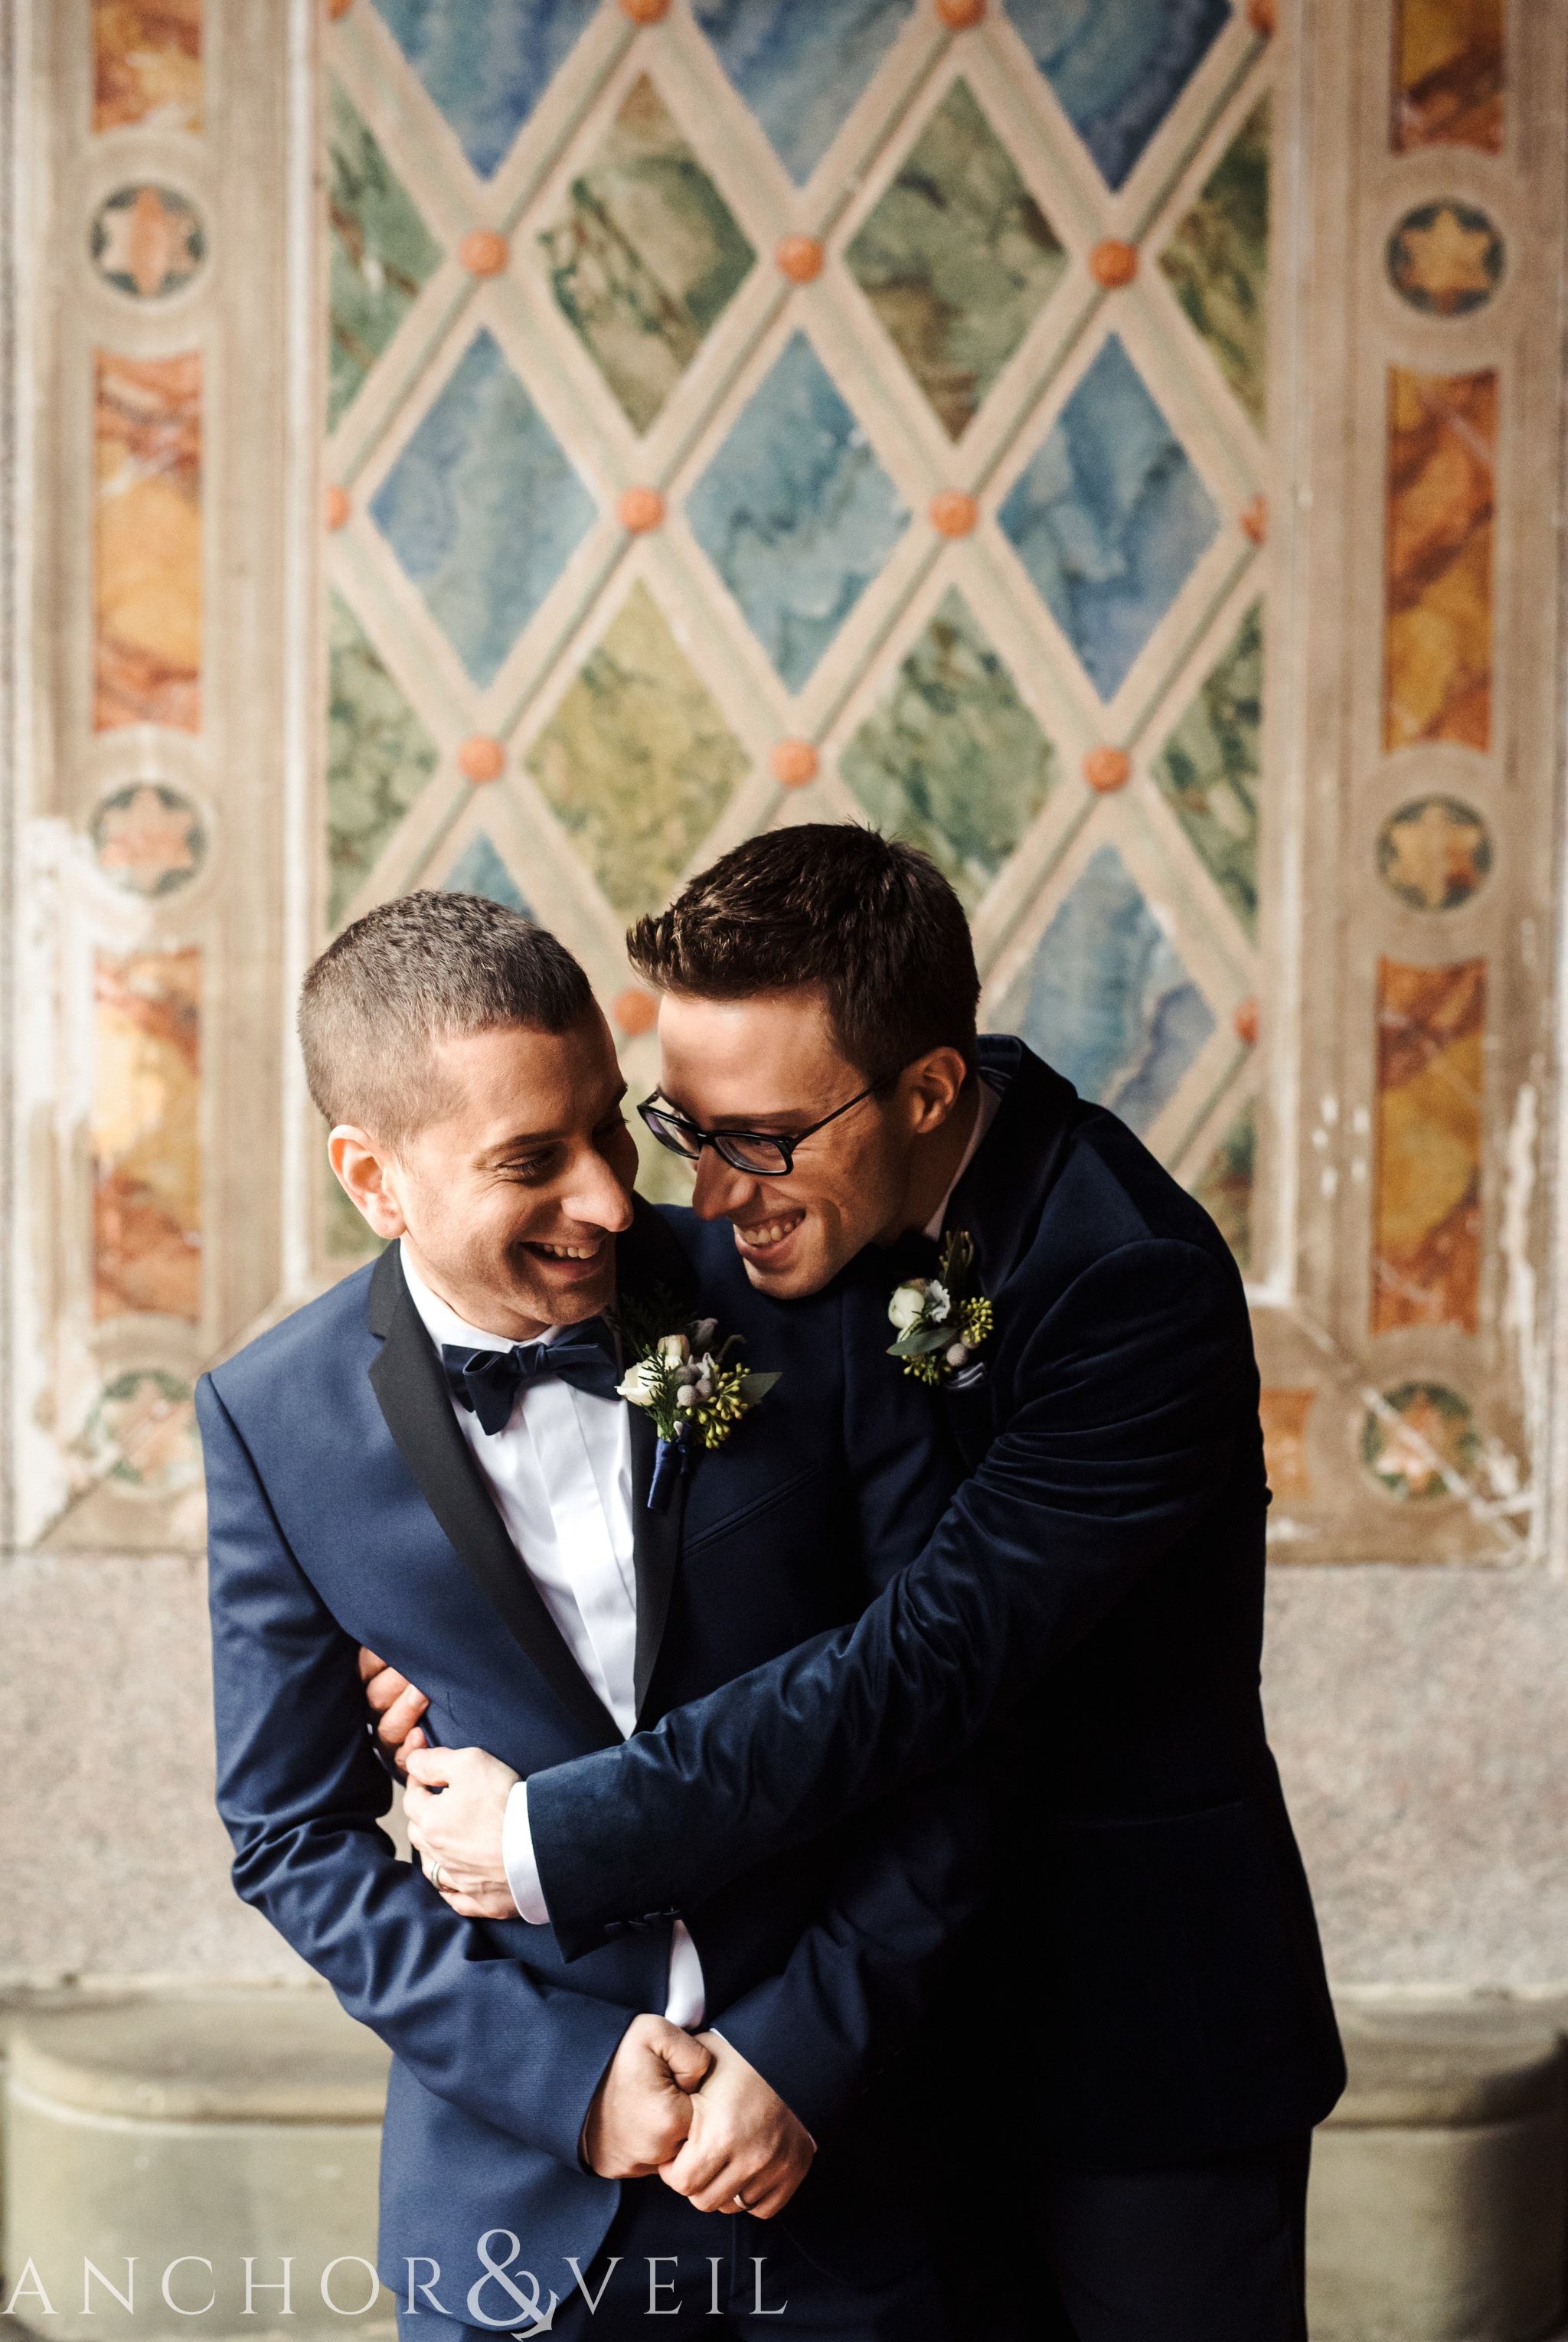 hugging each other during their central park elopement in bethesda Terrace